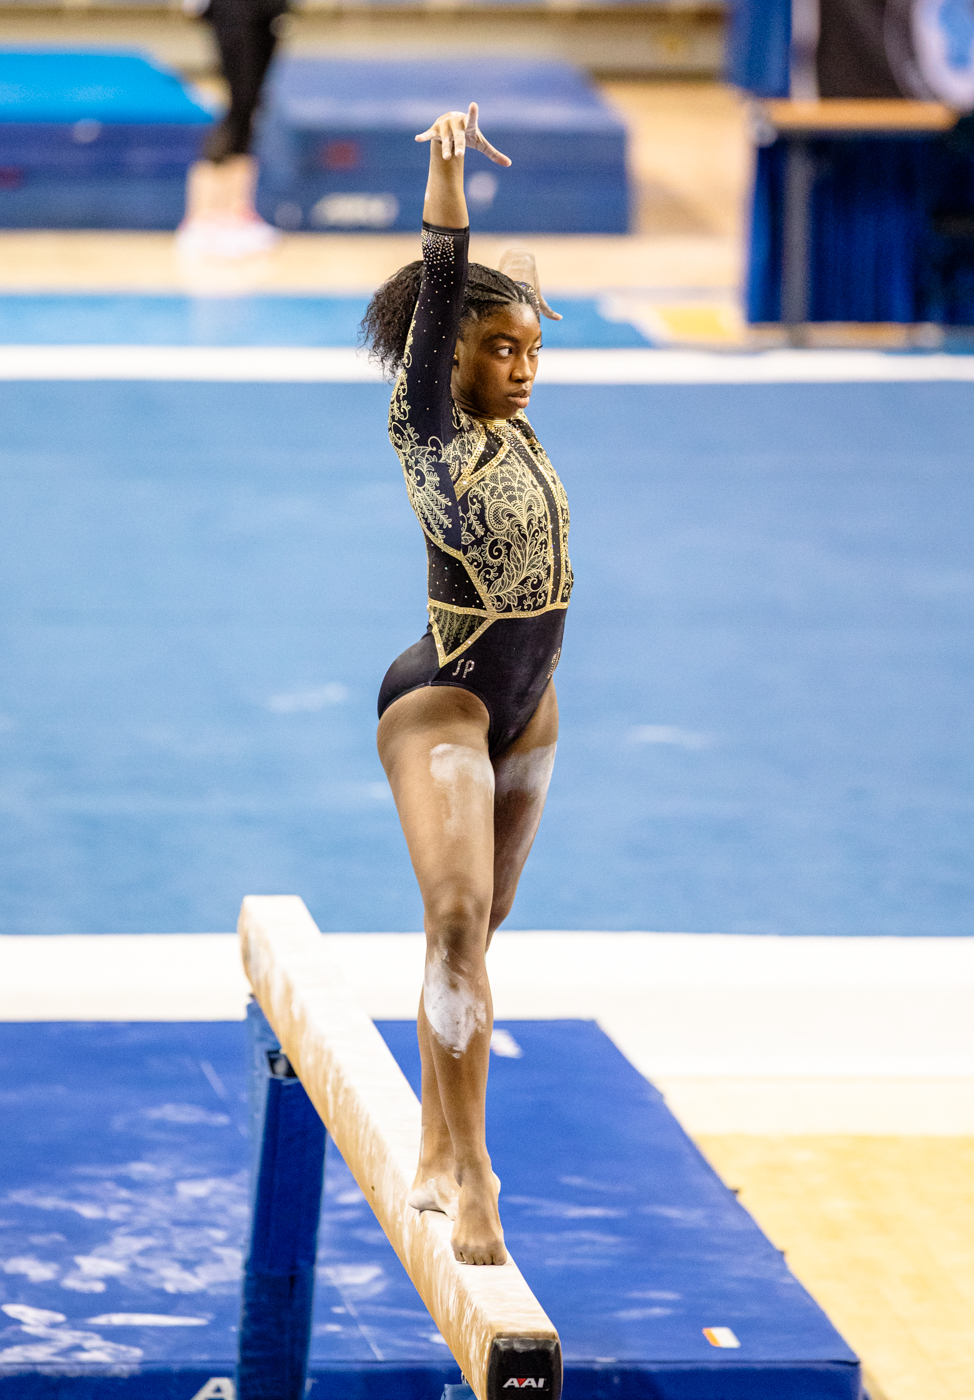 In shocking upset, Michigan fails to qualify for gymnastic Nationals